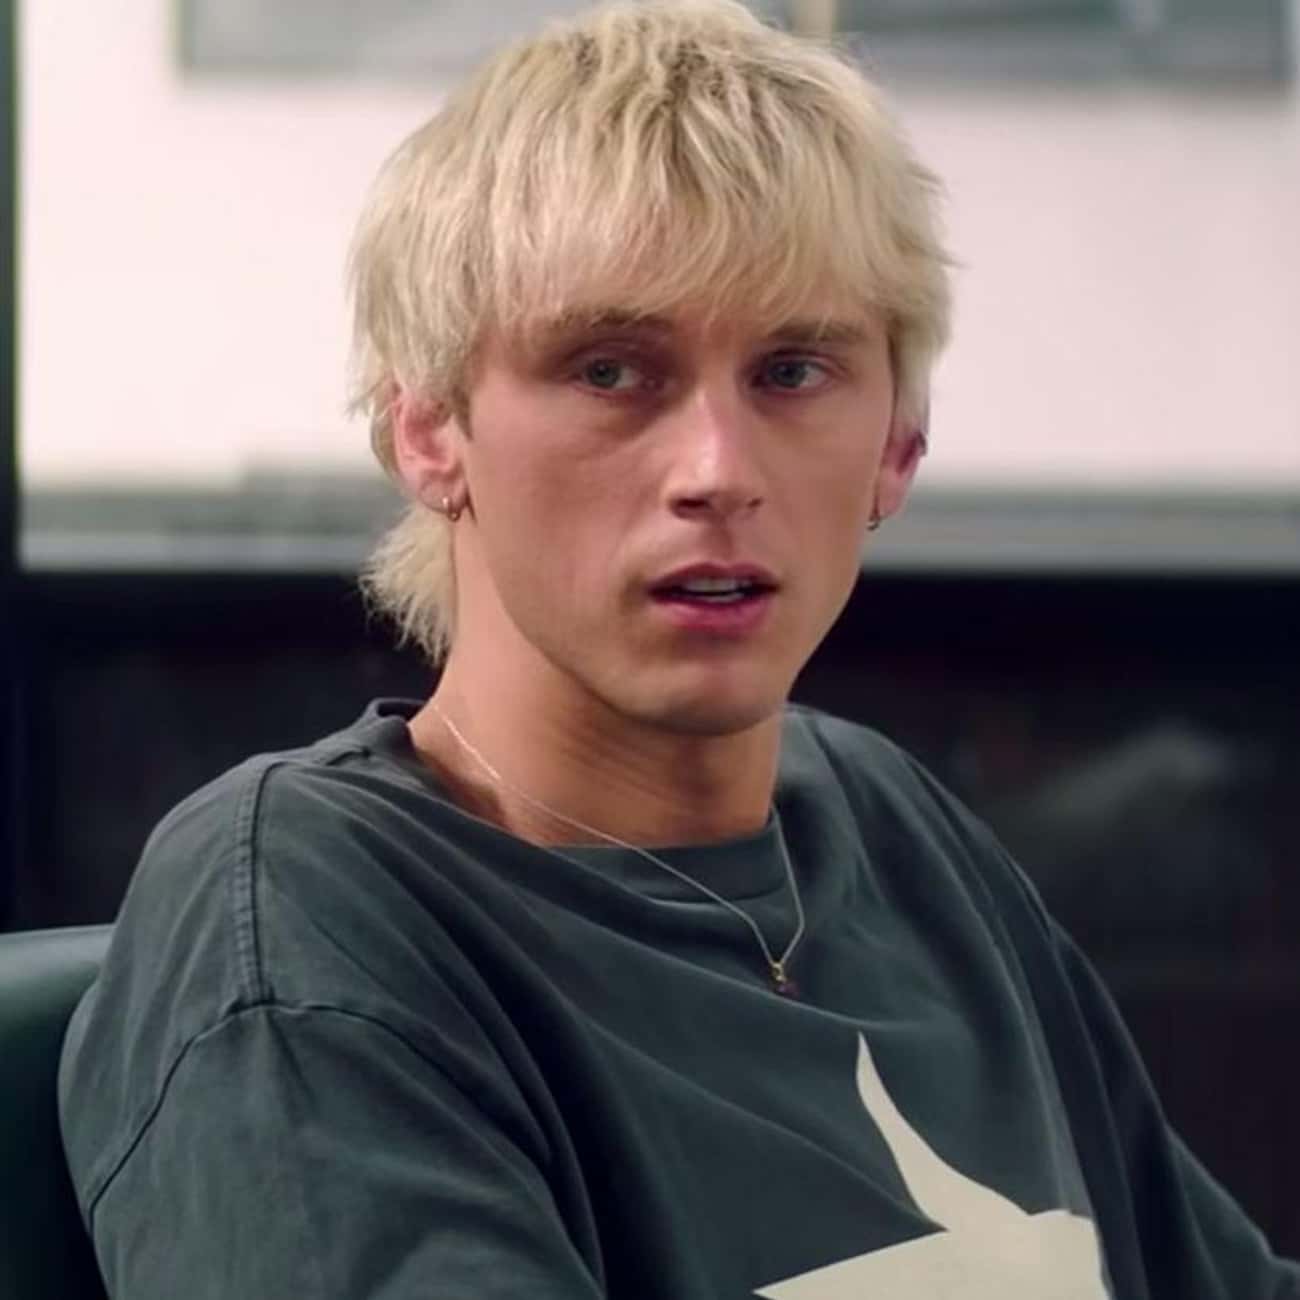 The Reason Eminem Dissed Machine Gun Kelly Was 'A Lot More Petty' Than Protecting His Daughter